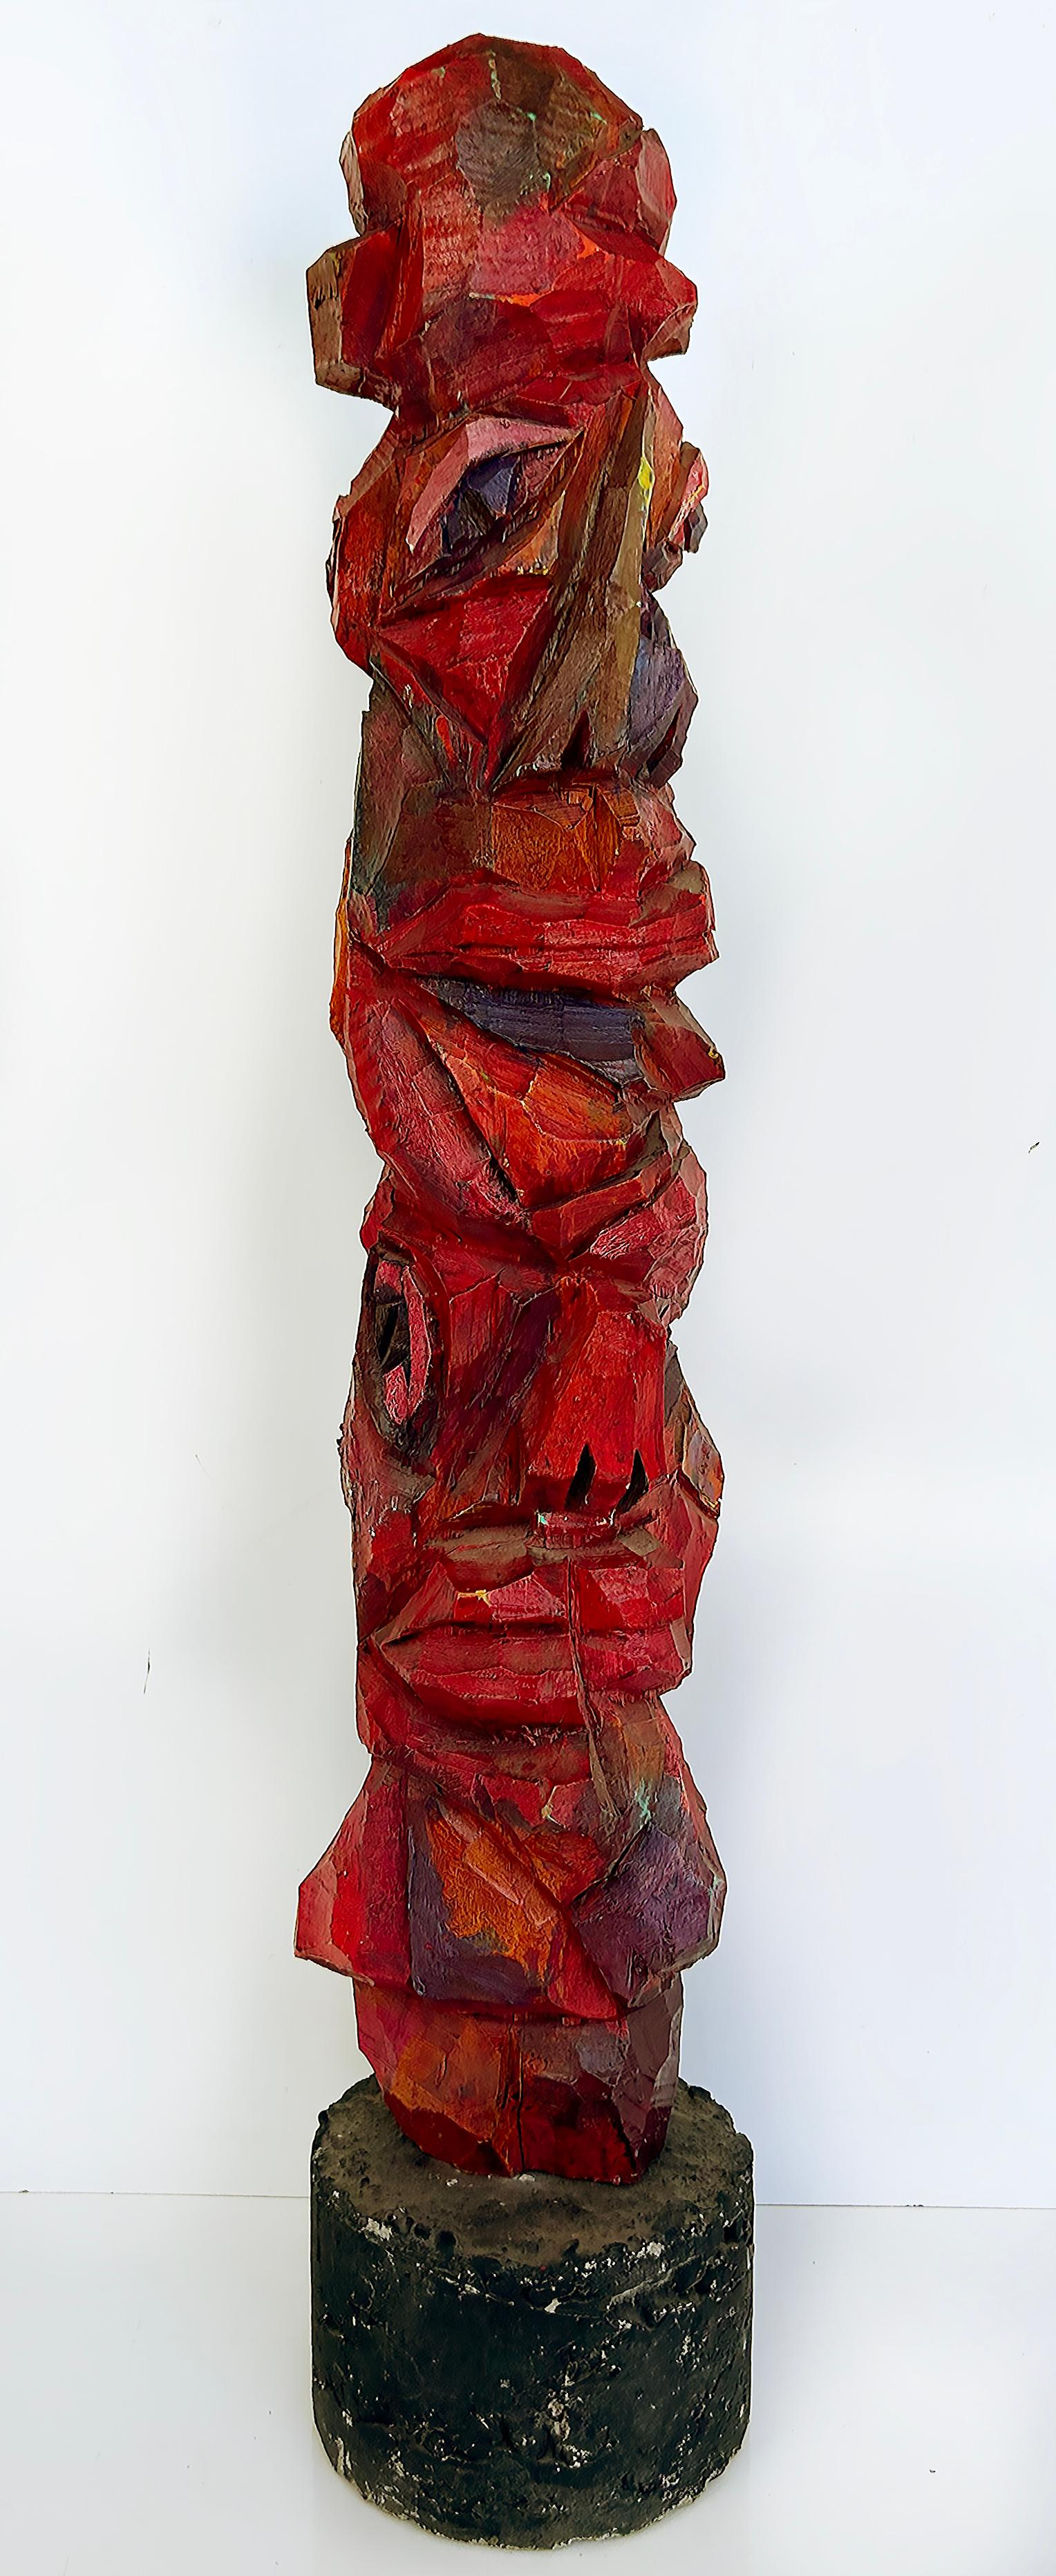 Vintage Tom Cramer Primitive Carved Totem Folk Art Sculpture, Polychromed

Offered for sale is a Tom Cramer primitive carved American folk art hand-carved, painted, and polychromed figurative sculpture. This is a recent acquisition is from a New